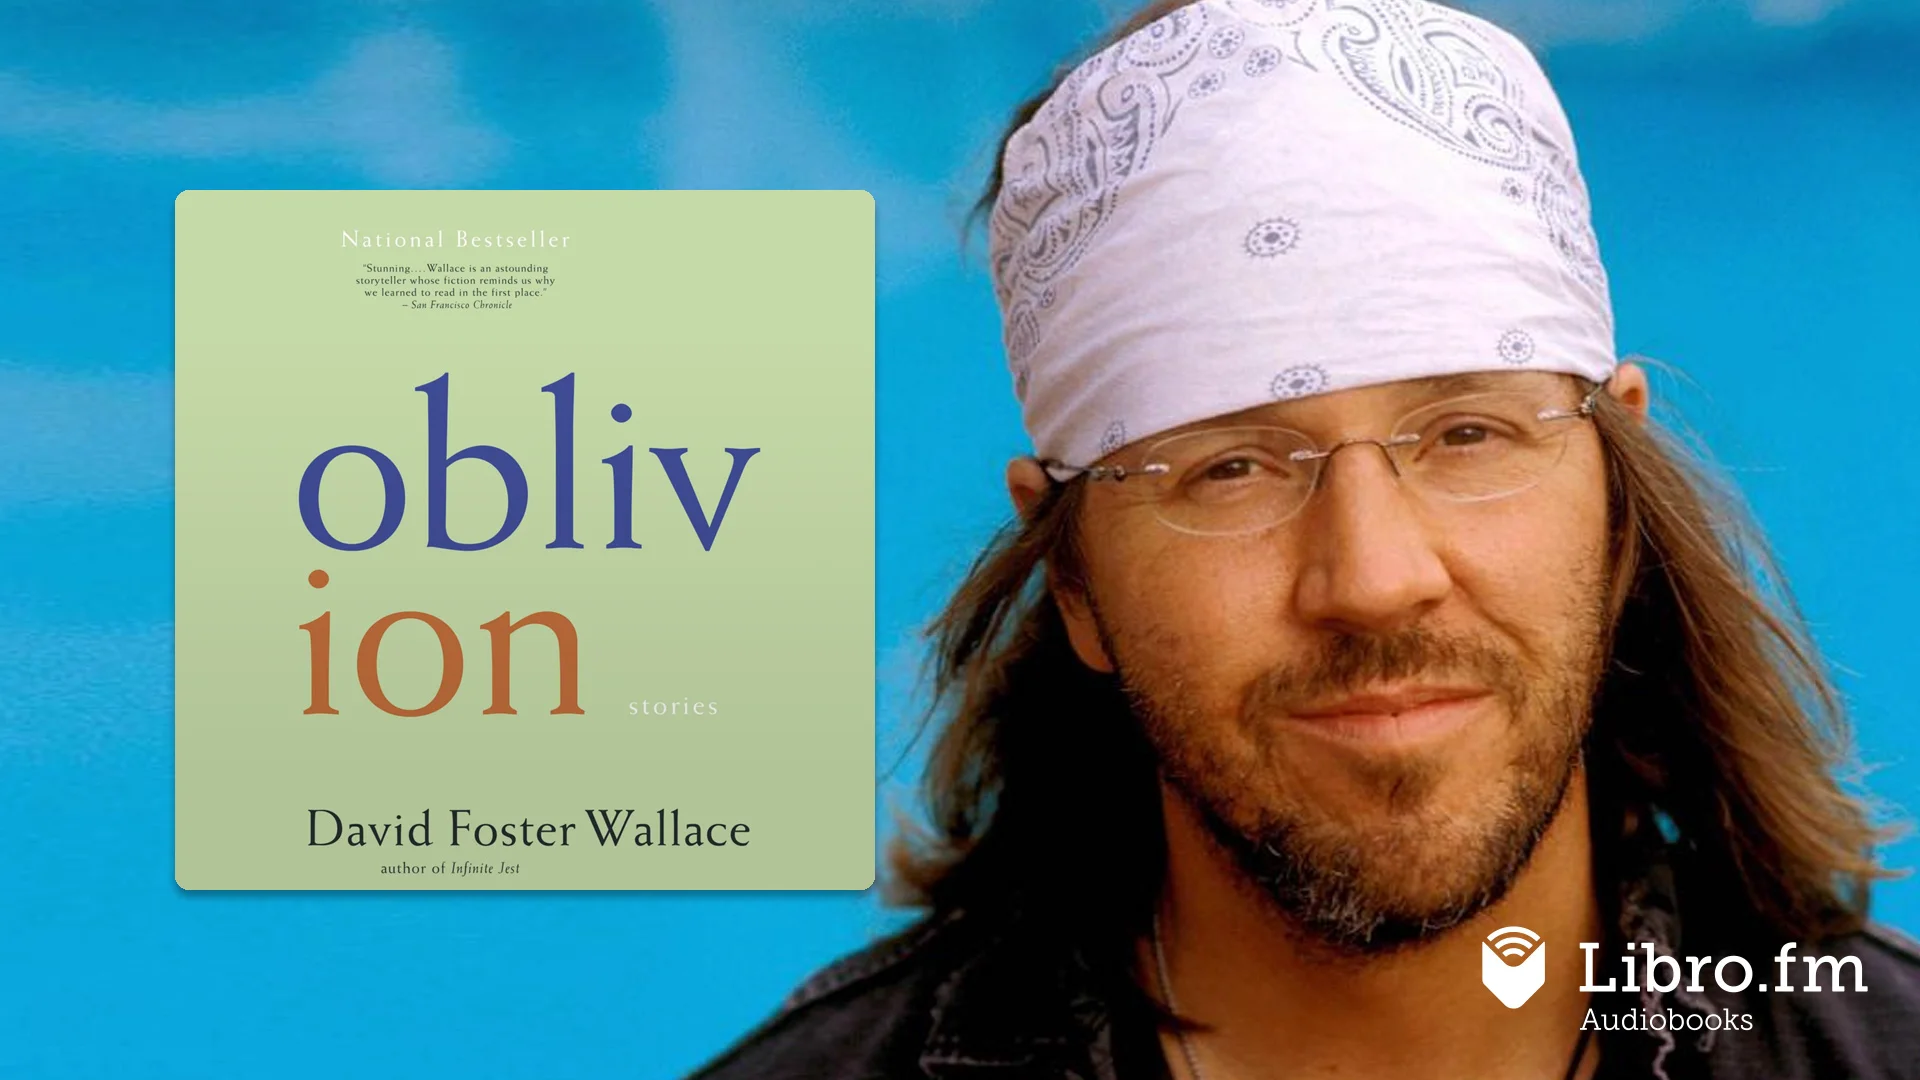 Infinite Jest by David Foster Wallace - Audiobook 